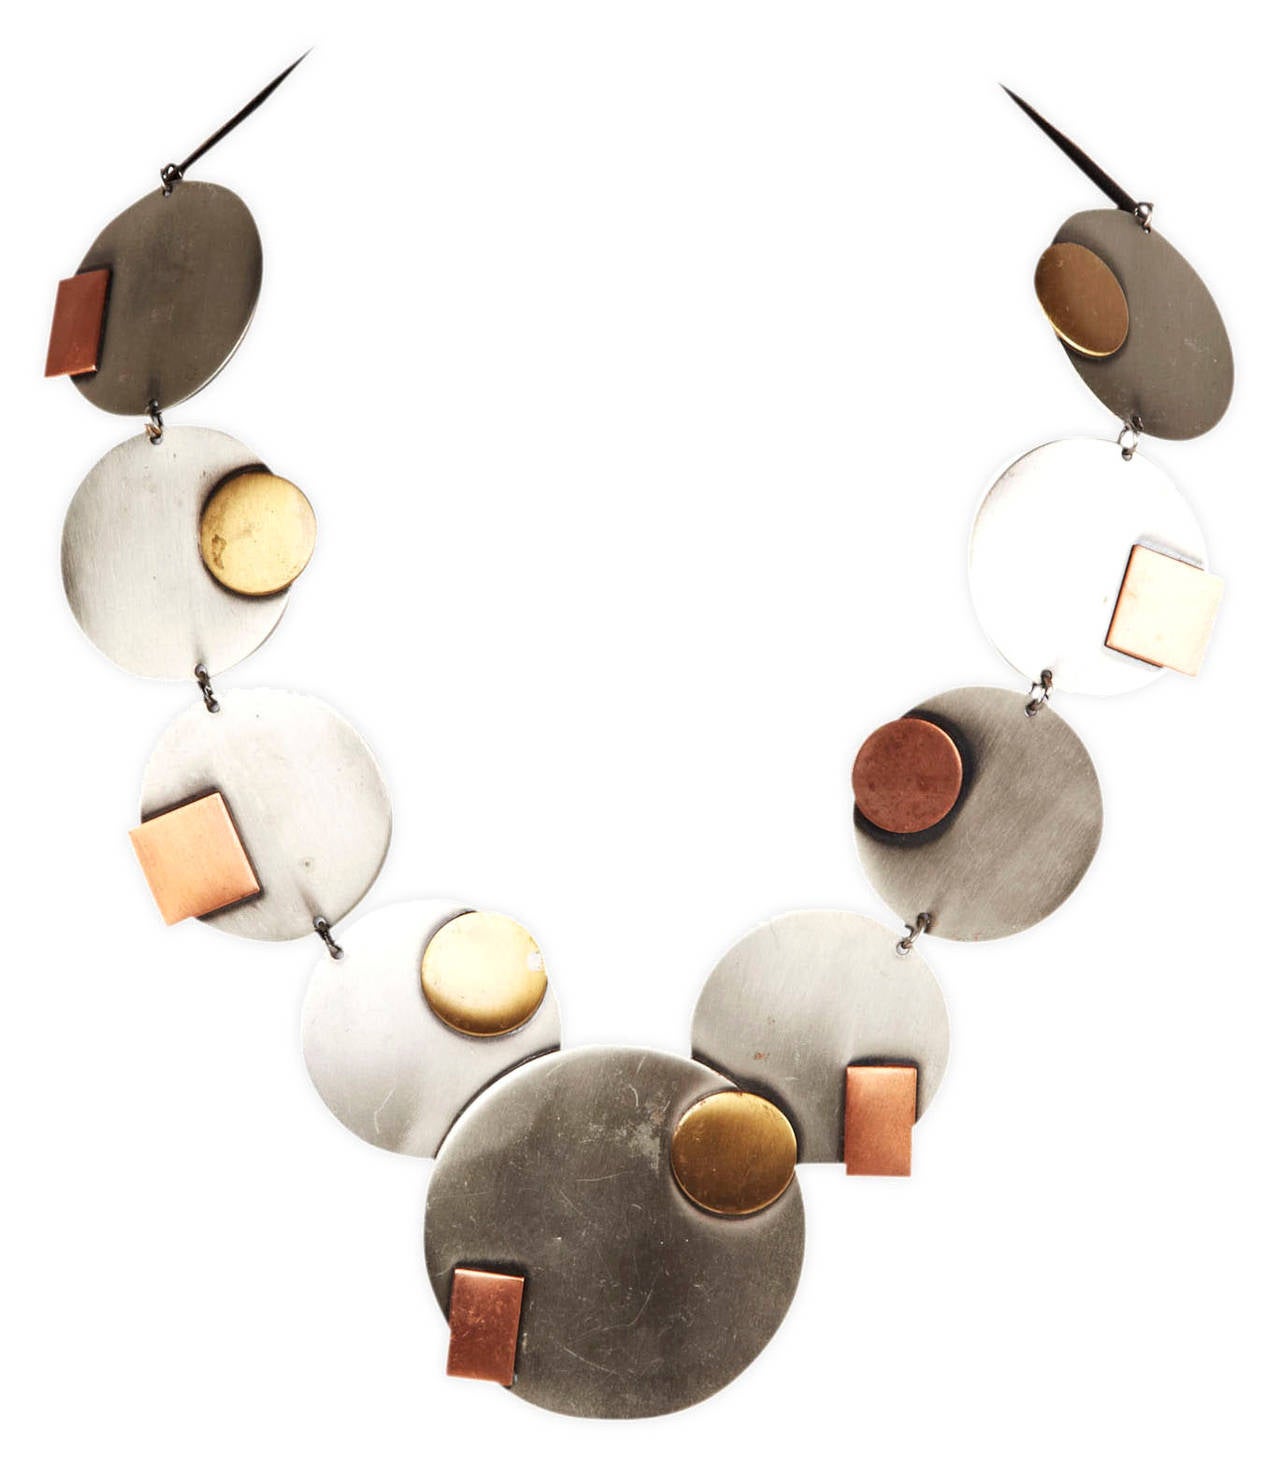 Modernist Geometric mixed metal necklace from the 1980's. Silvered discs are applied with contrasting copper and brass circles and squares. Large and striking in scale. 18.5